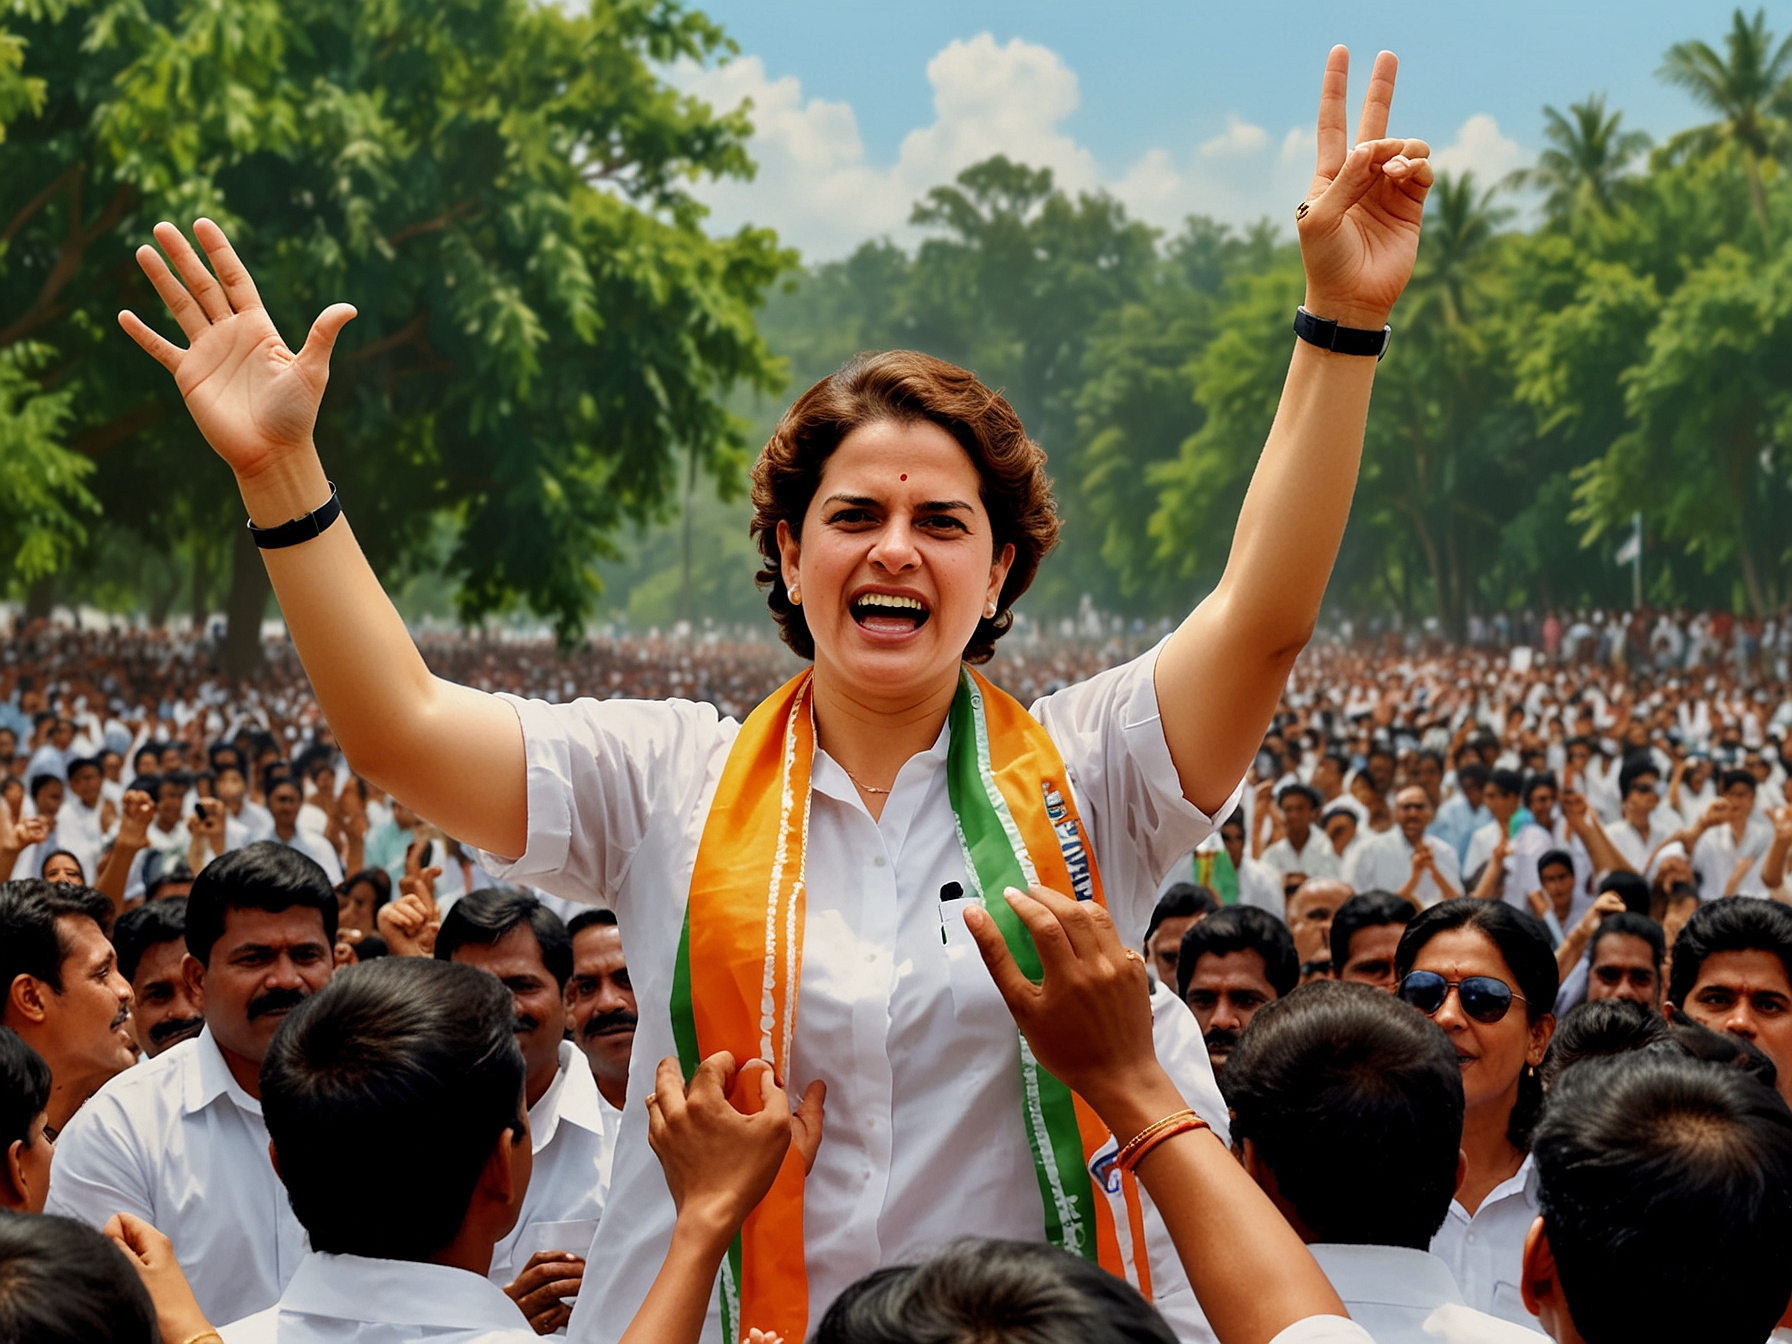 Priyanka Gandhi Vadra addressing a large crowd in Wayanad, emphasizing her charismatic debut in electoral politics, with enthusiastic supporters waving Congress party symbols.